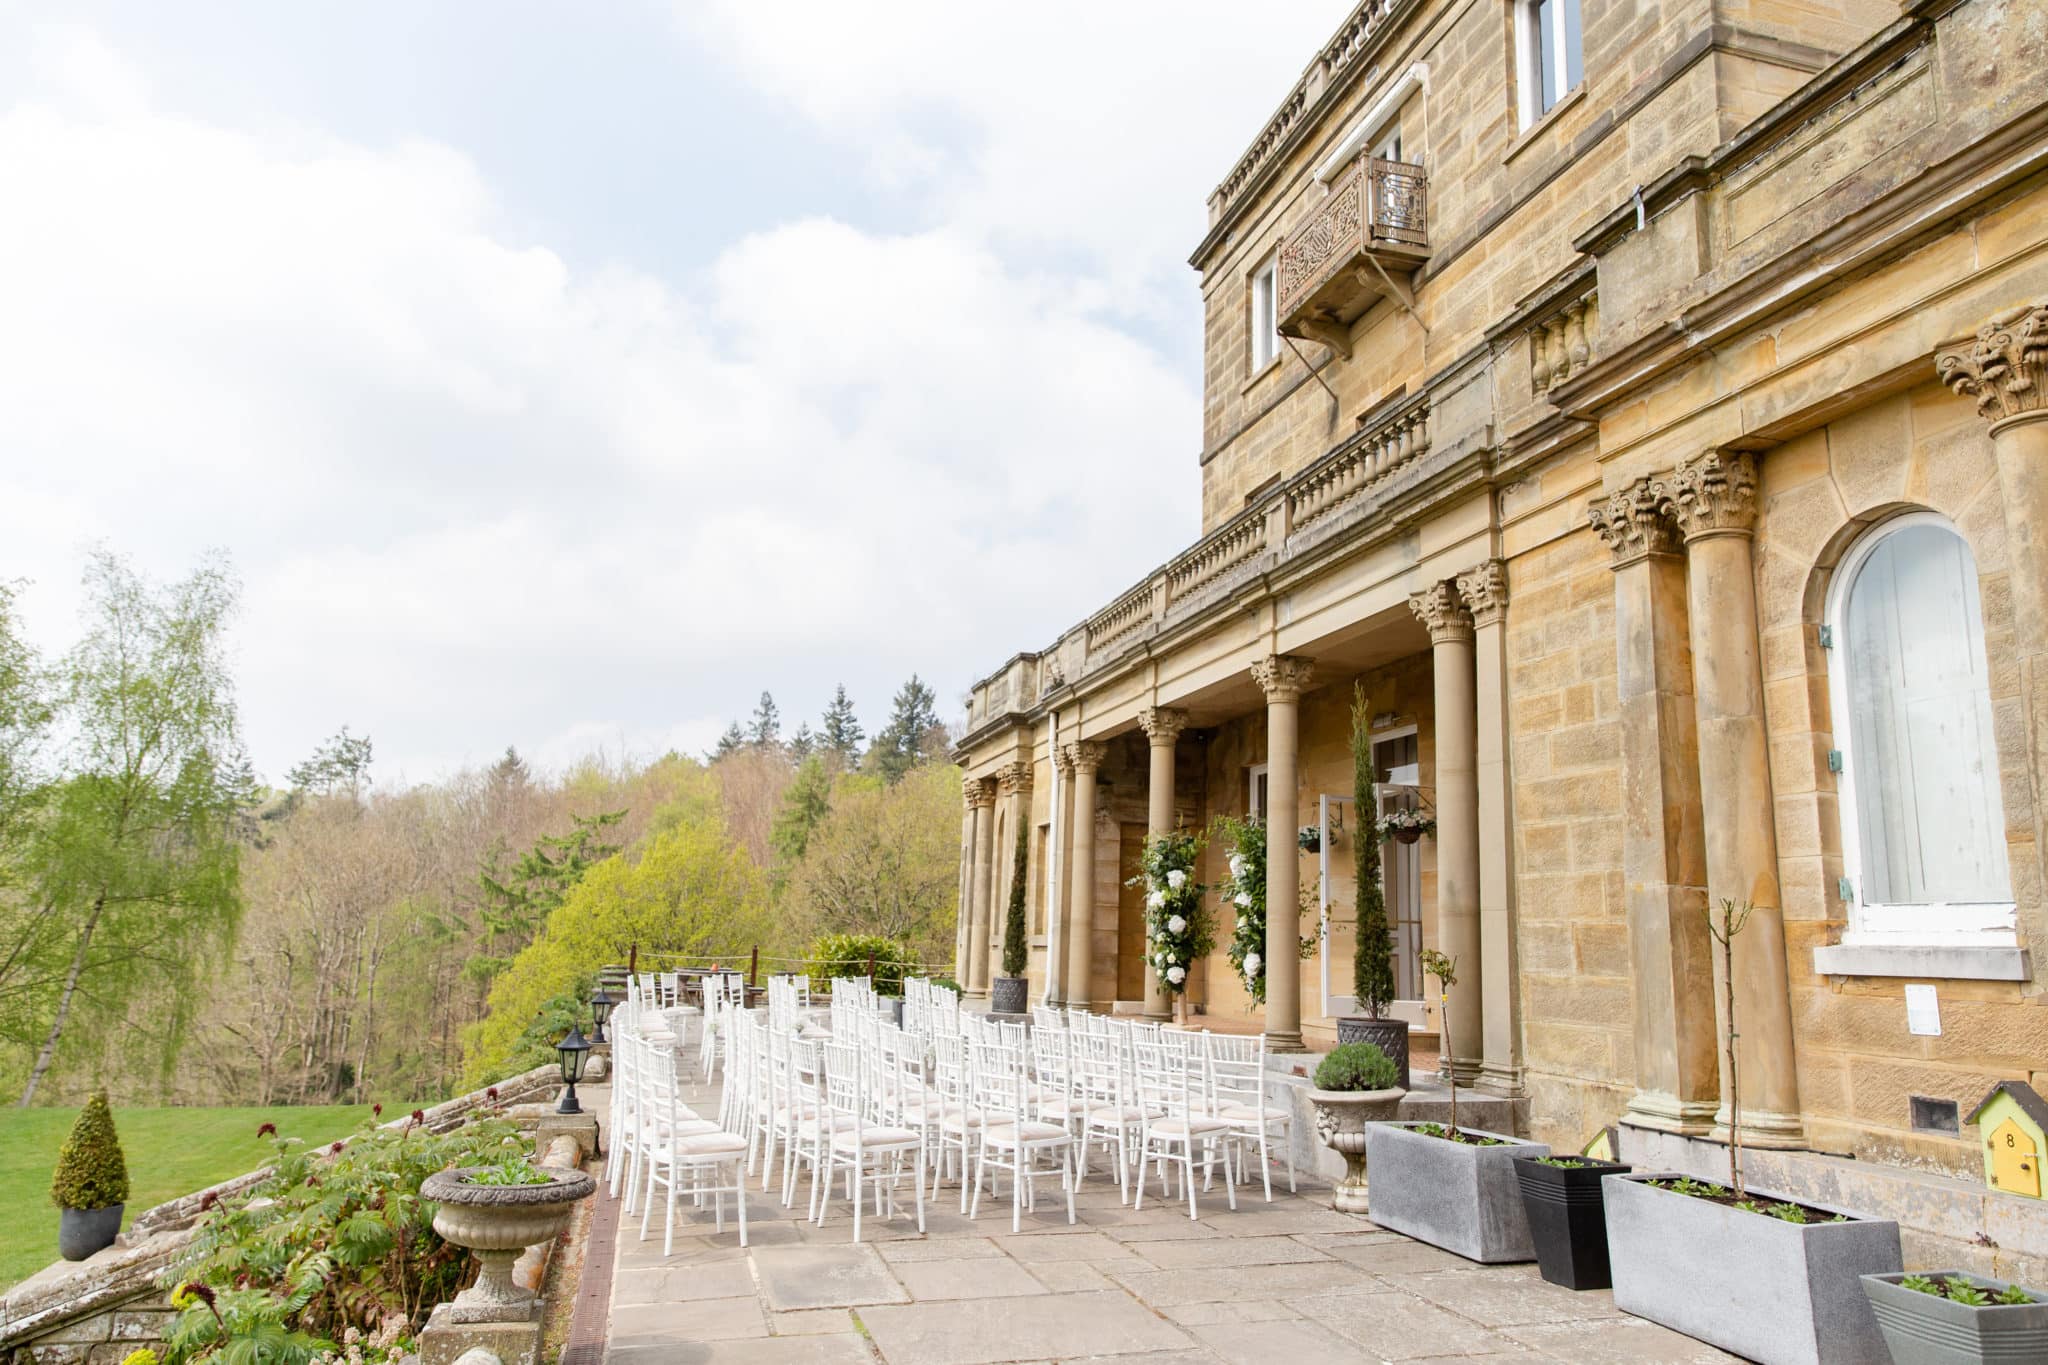 Outdoor area of salomons estate with white chairs